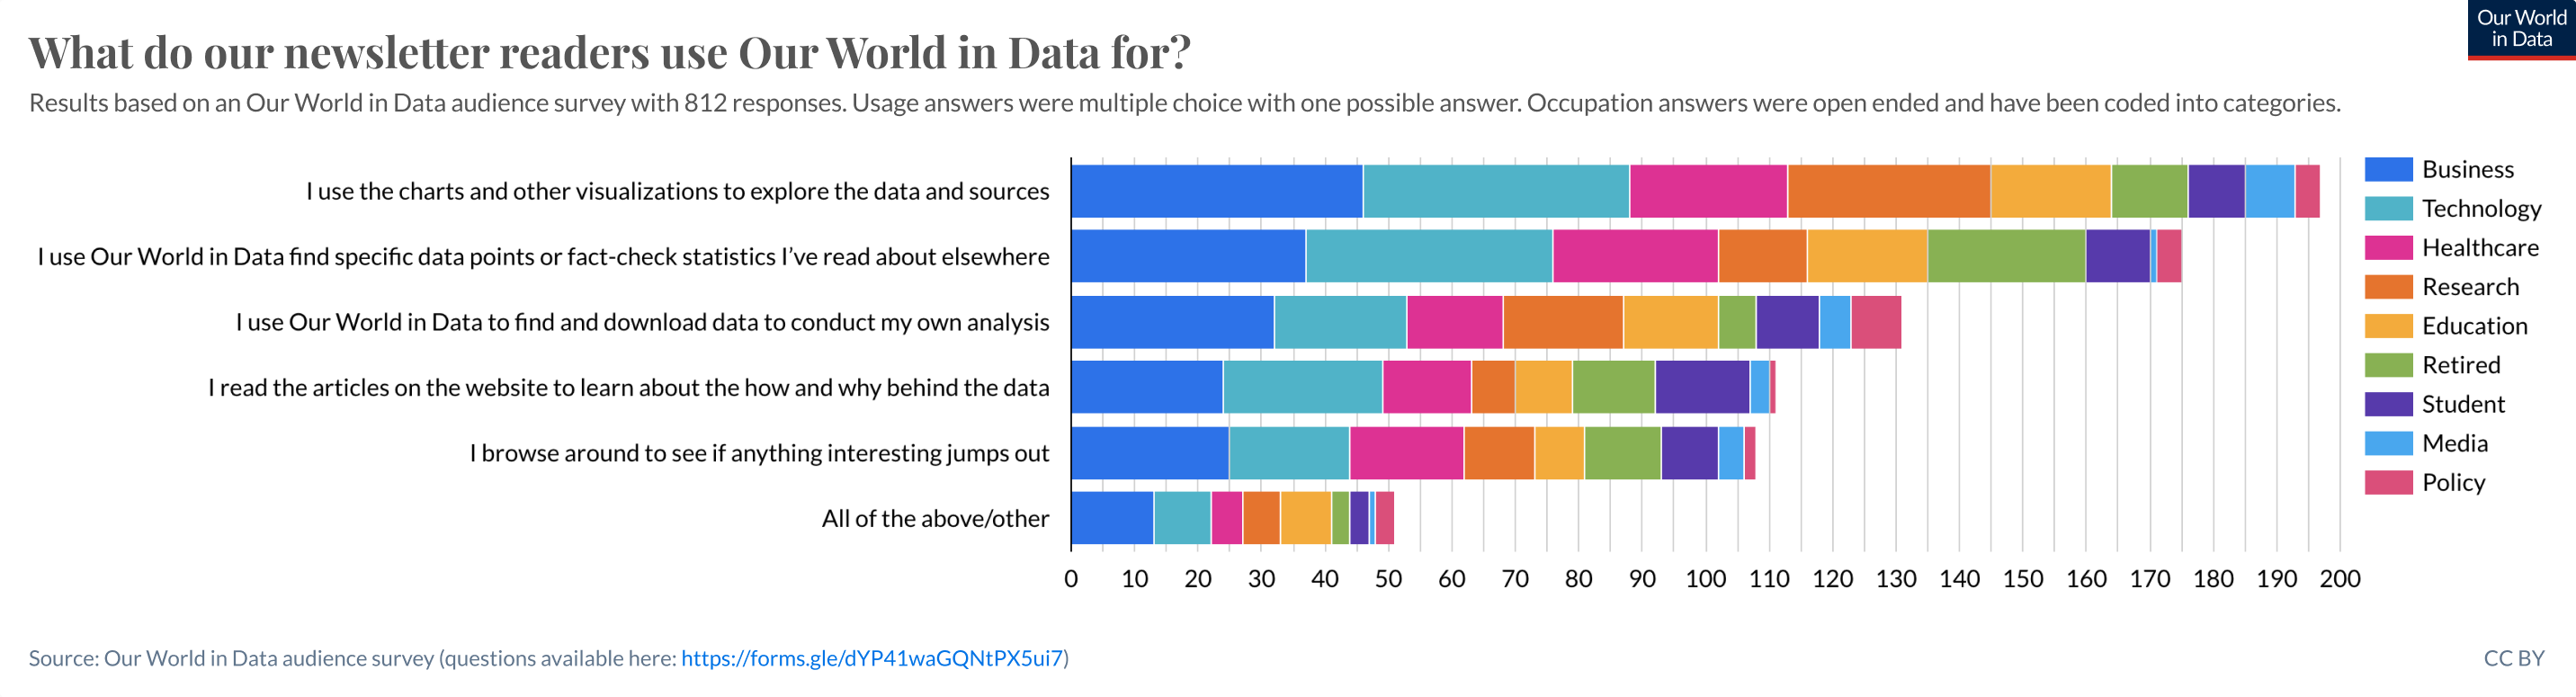 What do our newsletter readers use Our World in Data for?